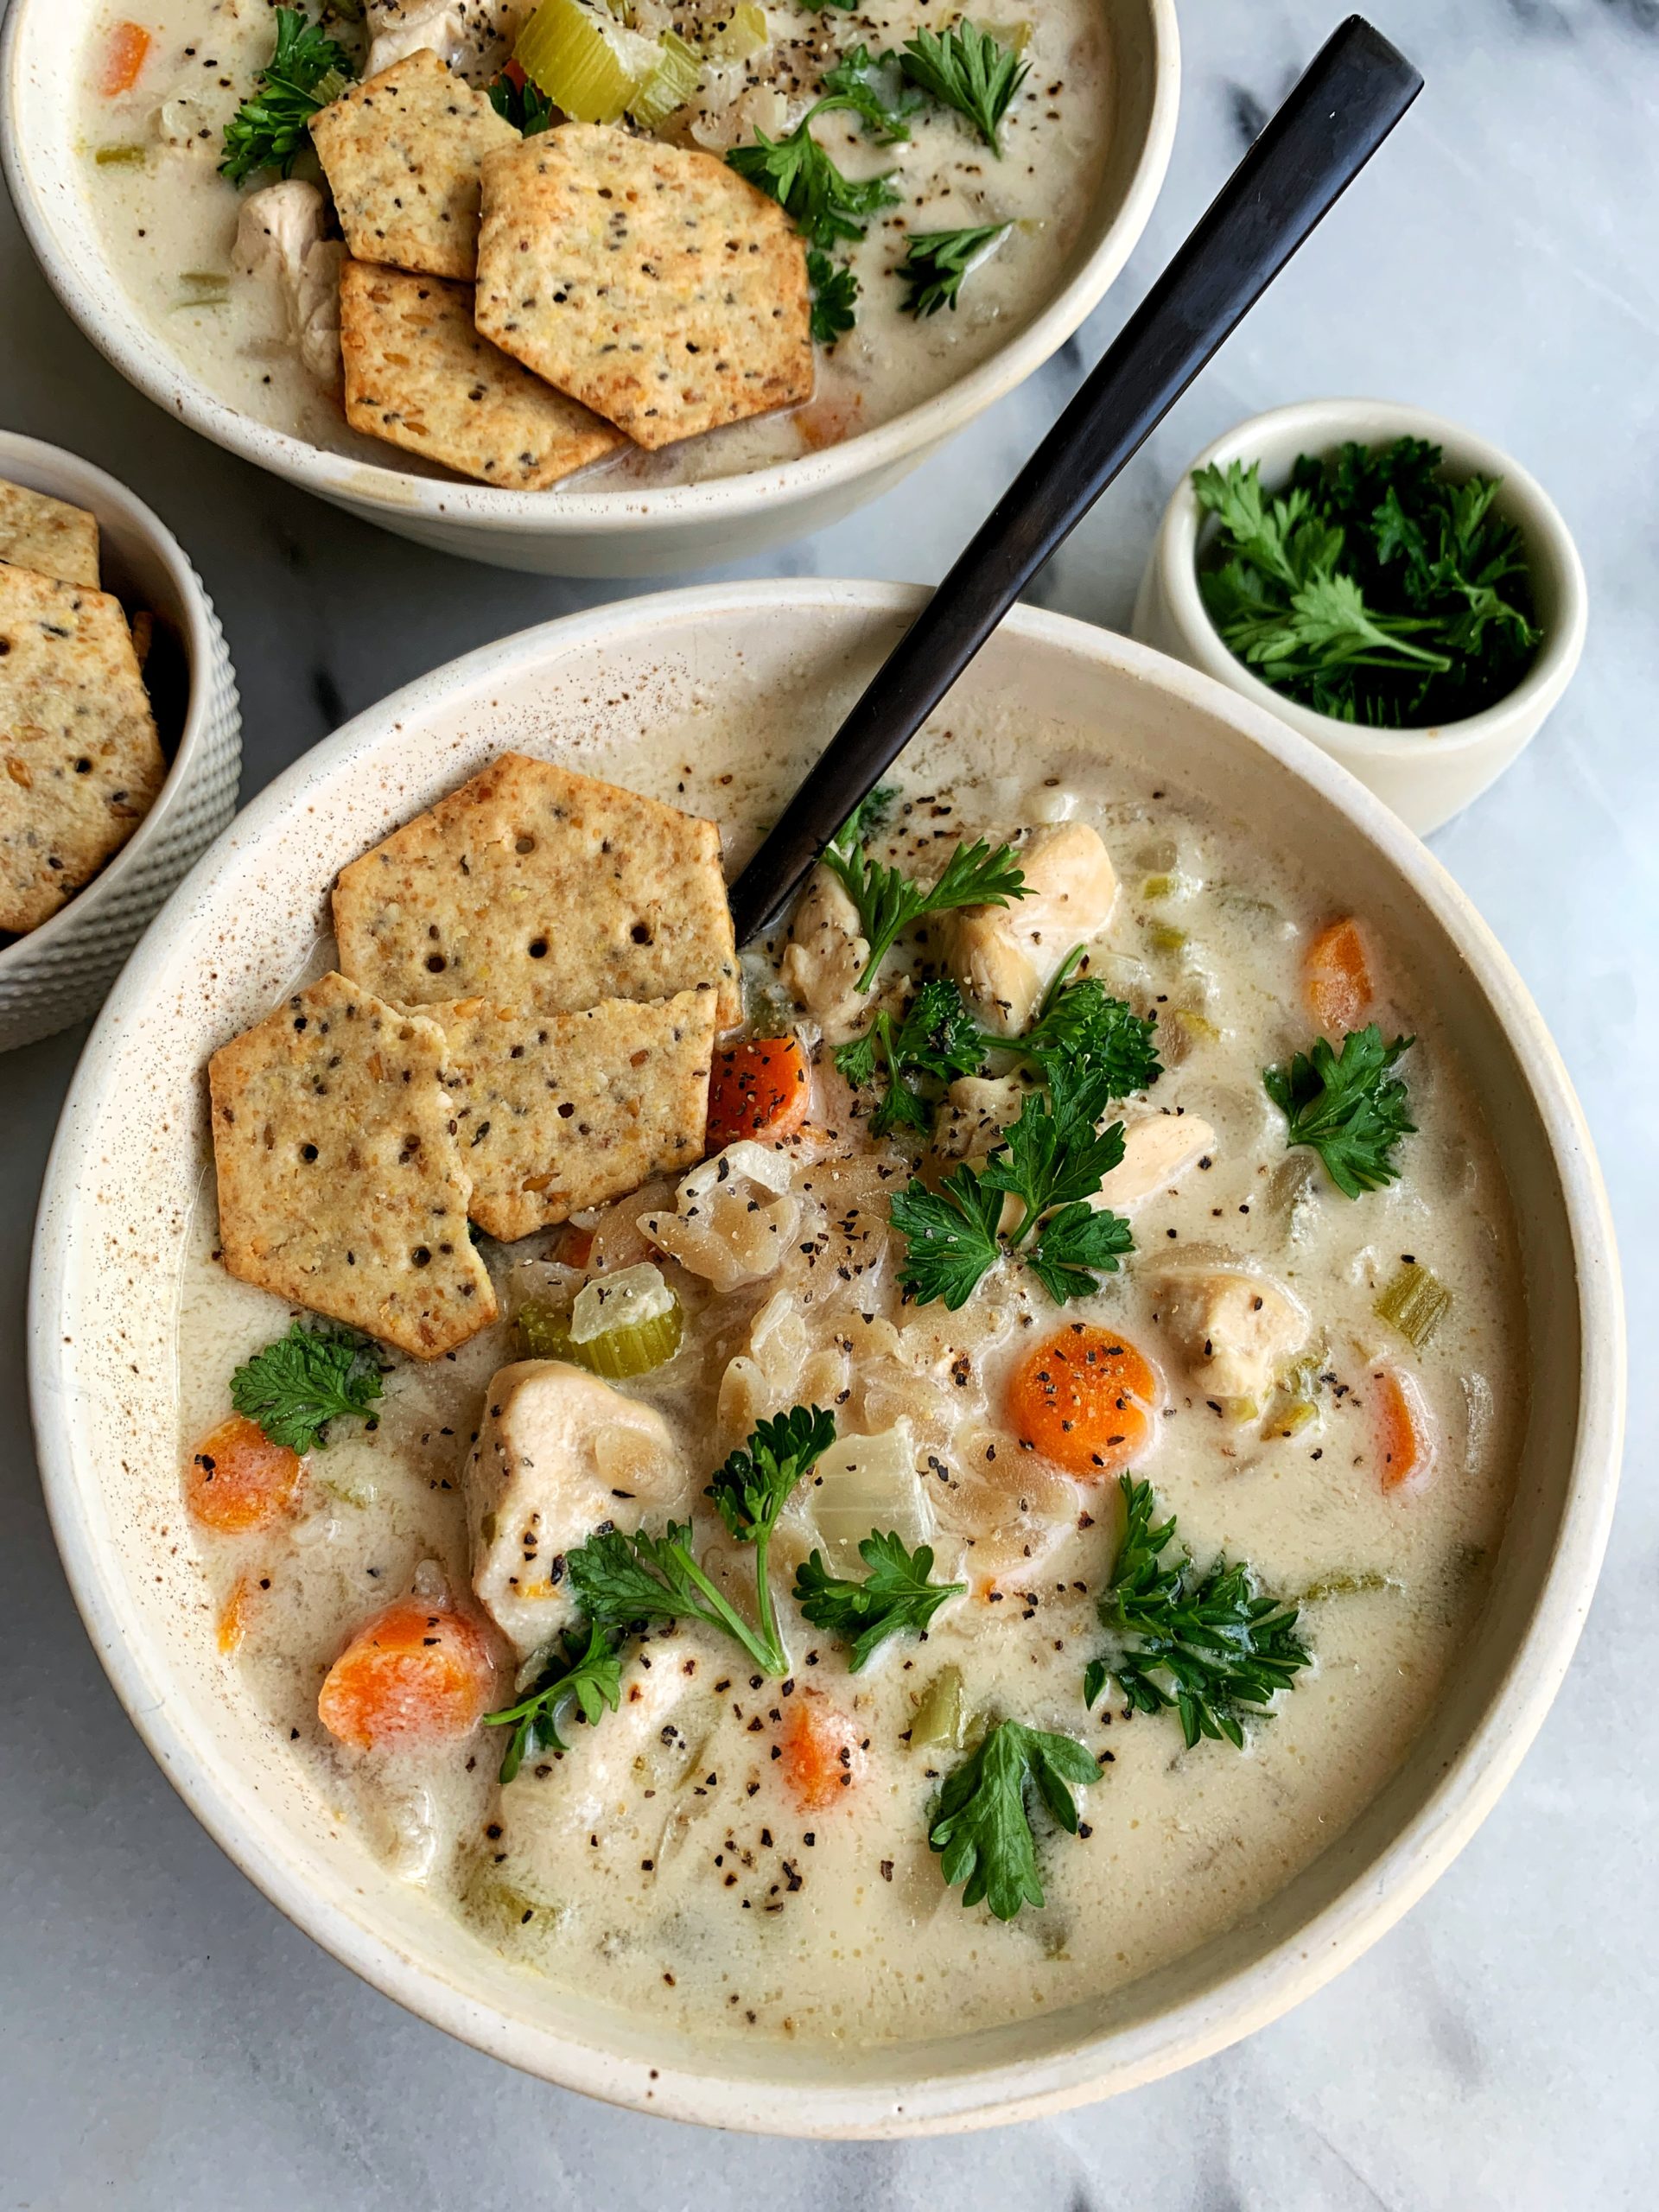 Delicious Paleo Creamy Chicken and “Rice” Soup | rach L mansfield ...